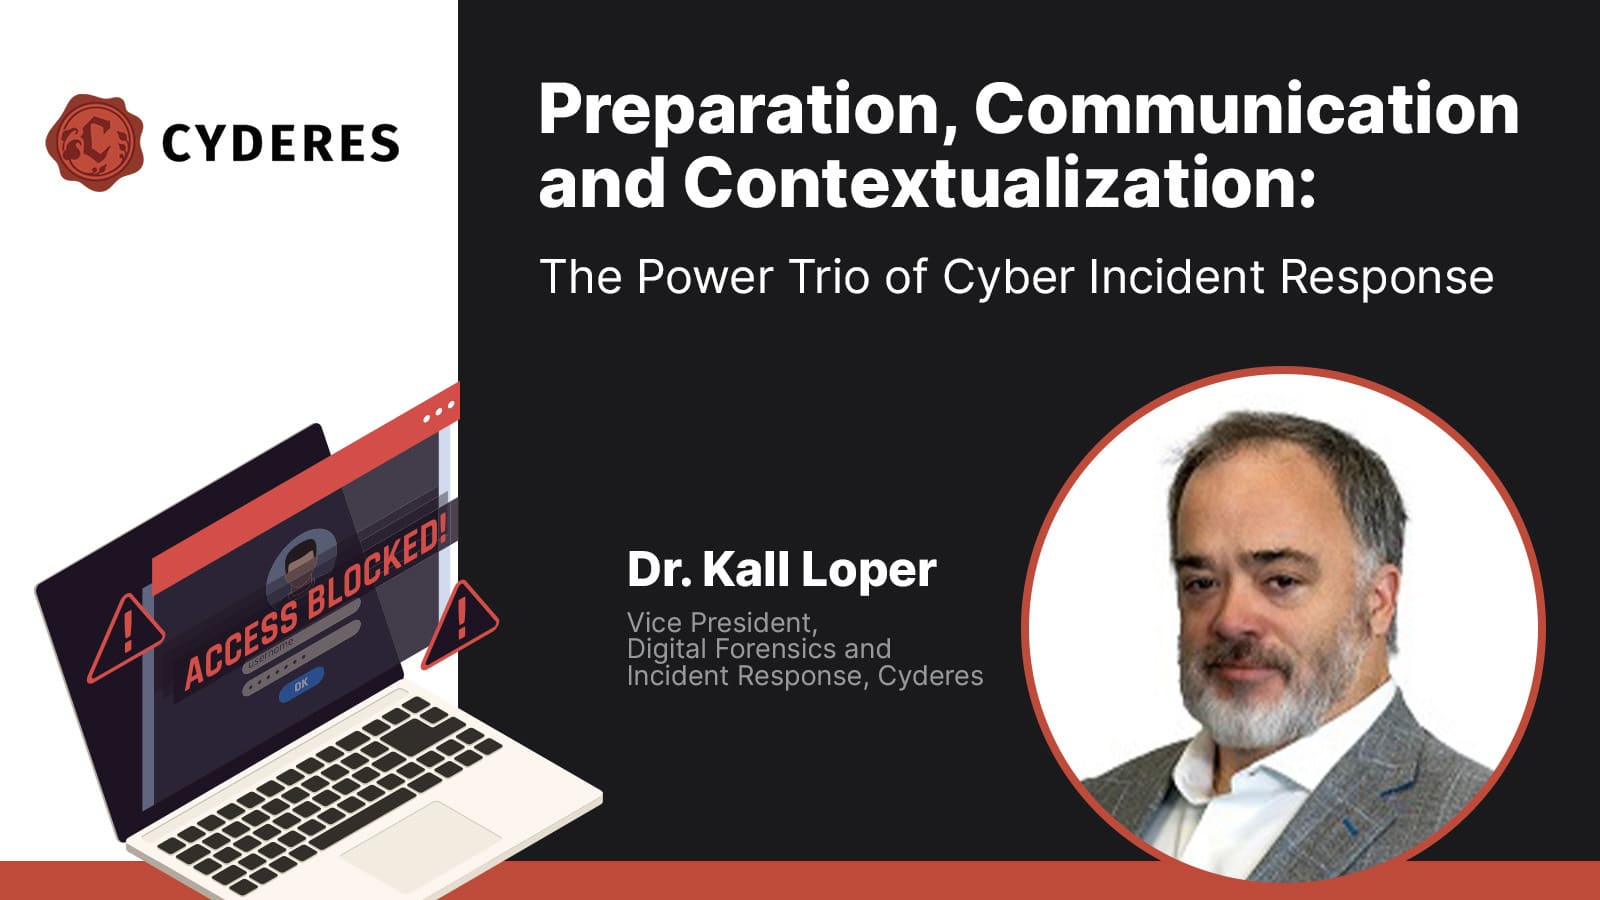 Preparation, Communication and Contextualization: The Power Trio of Cyber Incident Response